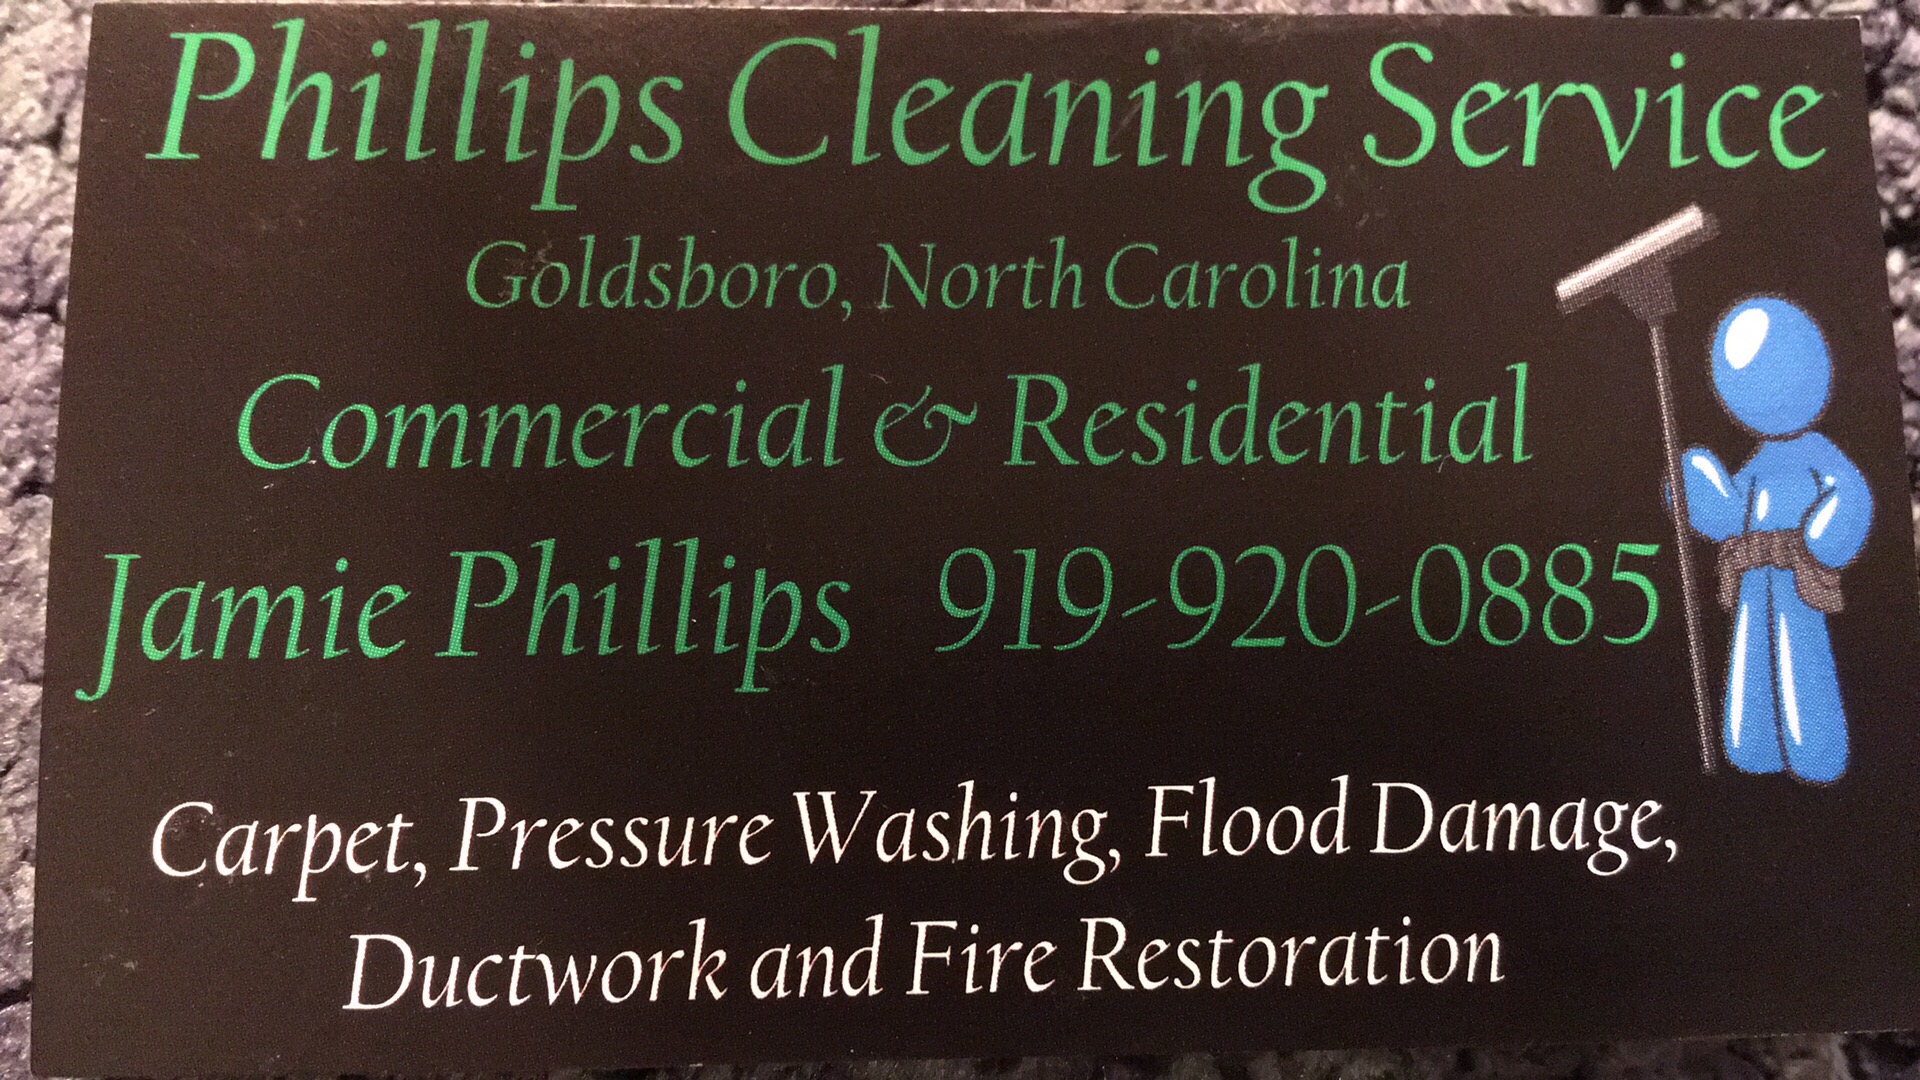 Phillips Cleaning Service Logo